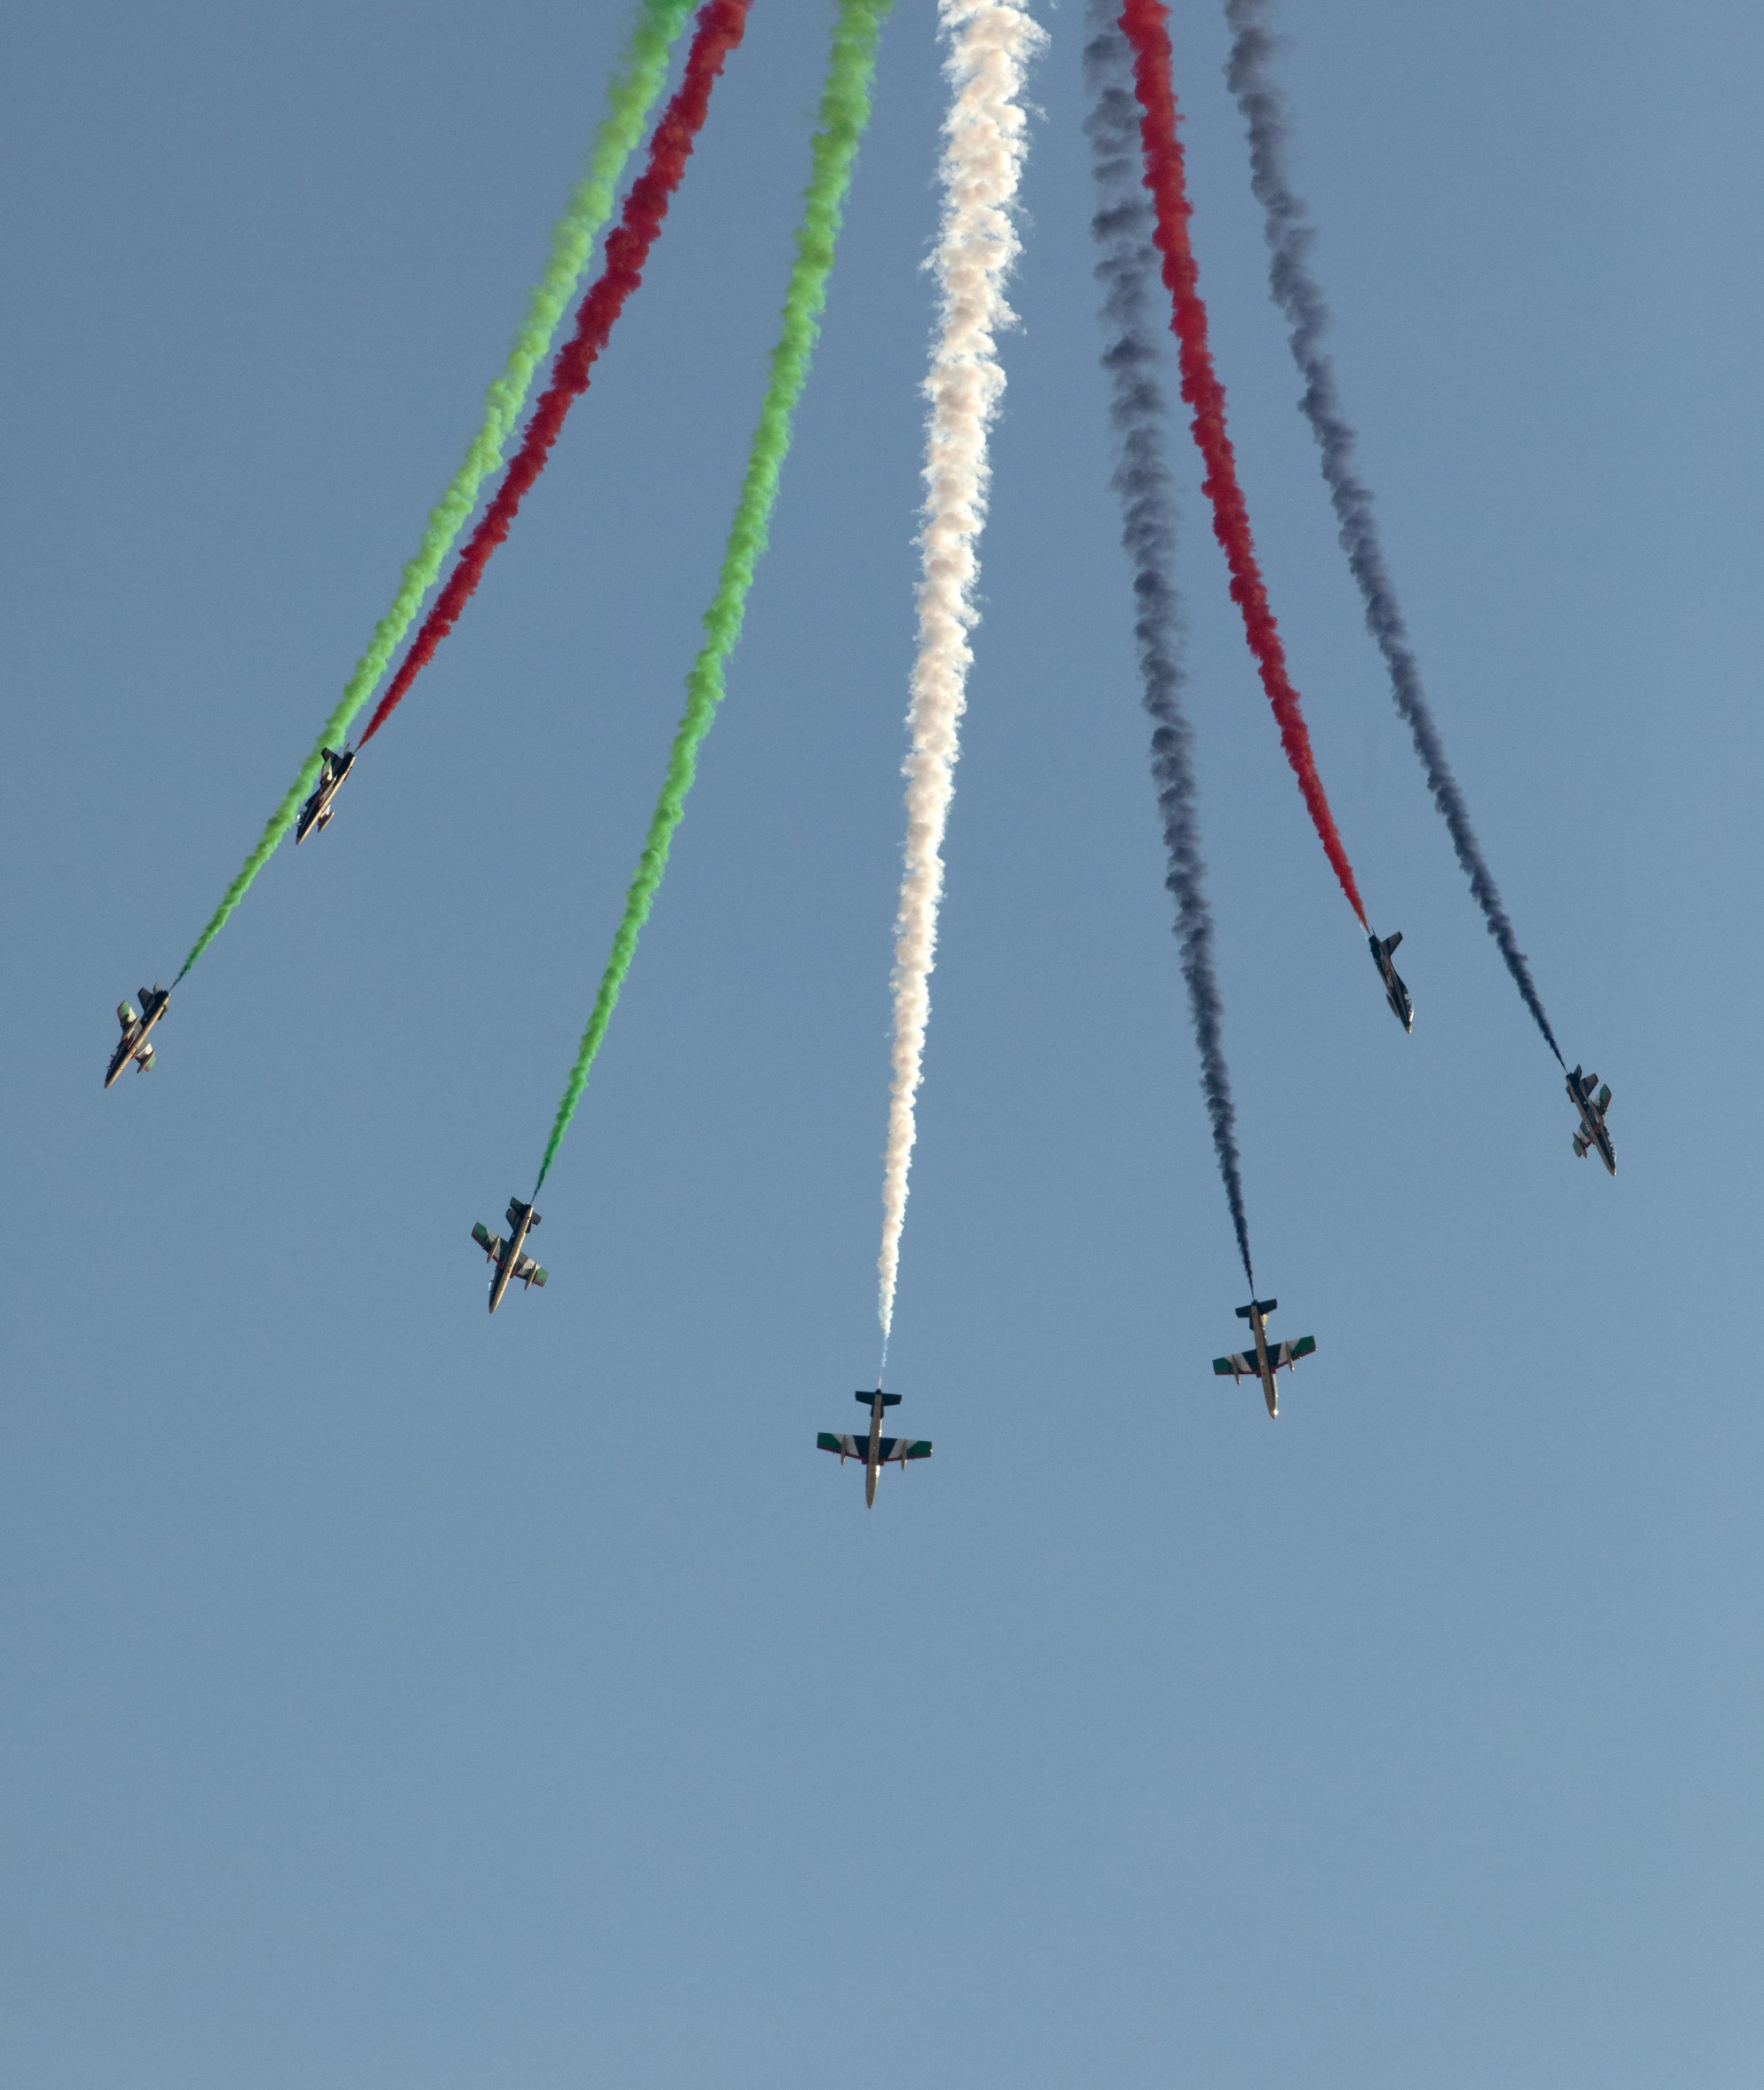 Al Fursan air show during UAE National Day and the Golden Jubilee Celebrations m16021